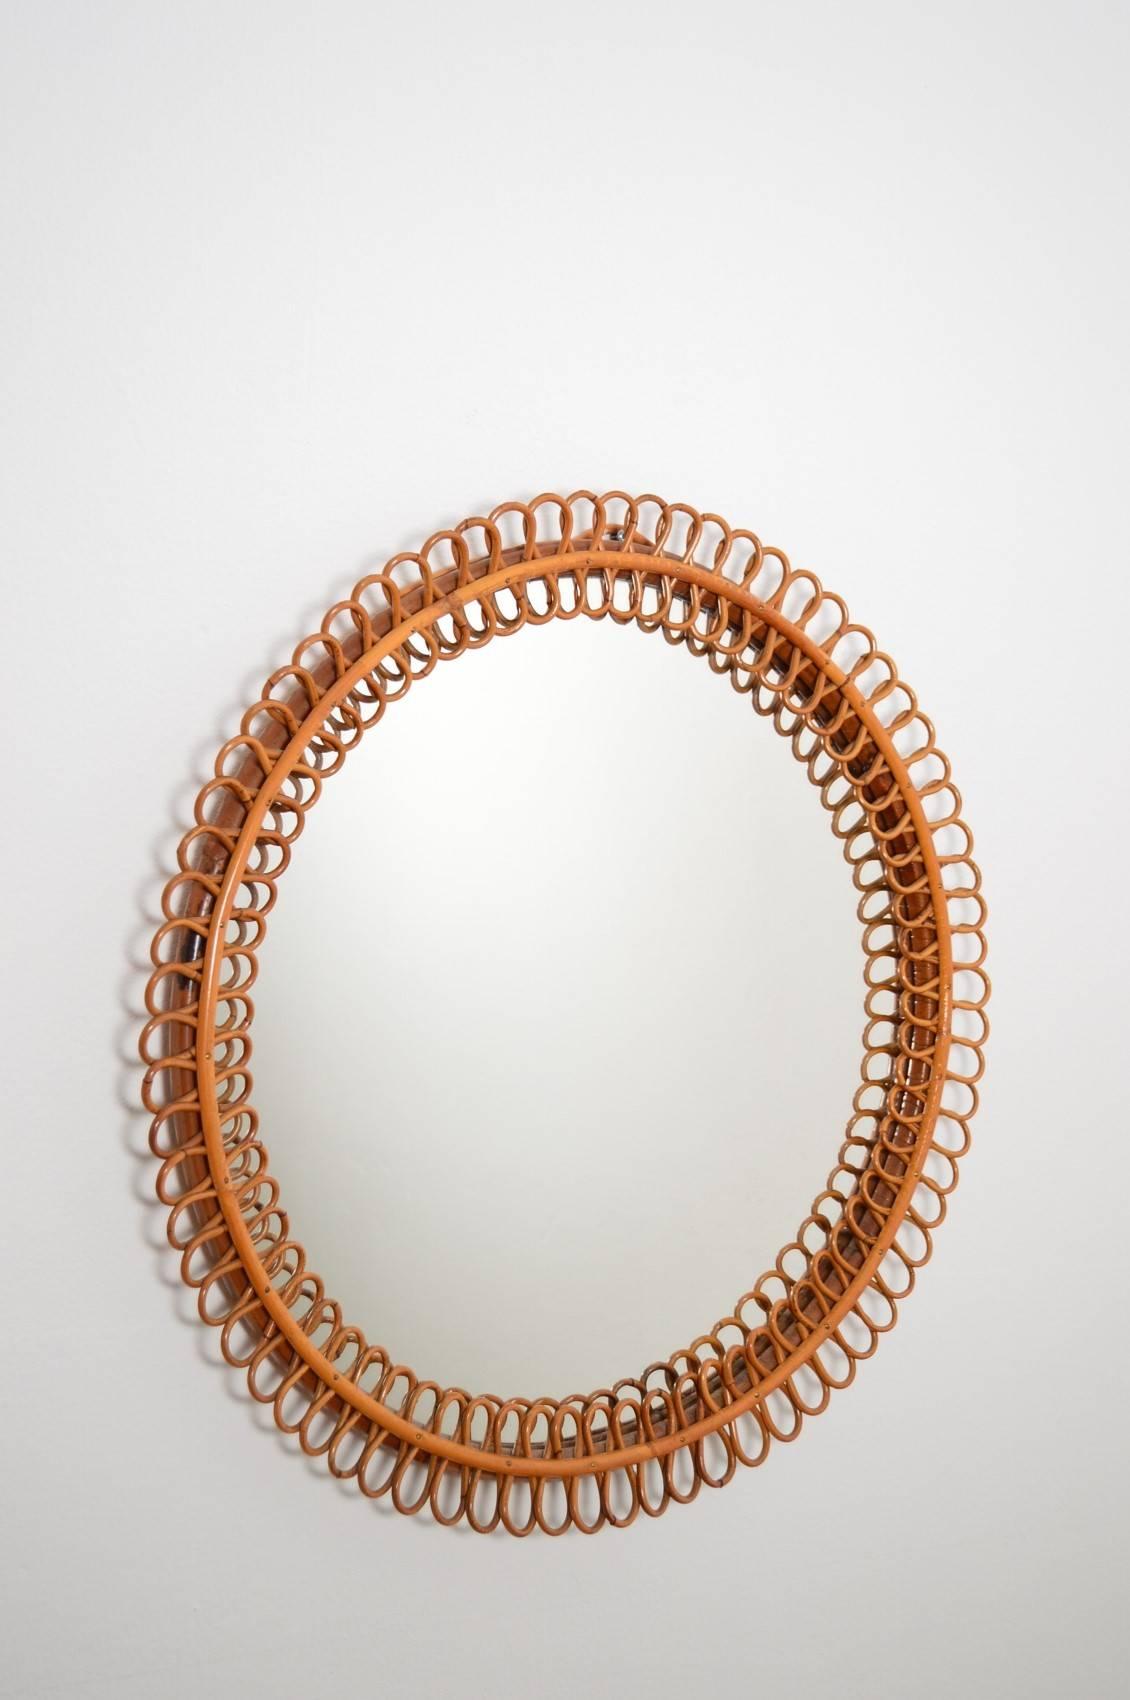 Beautiful big round wall mirror or Italian Riviera style mirror, made of natural rattan material.
Made in Italy in the 1970s.
Excellent condition.
At the backside one hook for wall hanging.
The mirror has been cleaned and is ready for use.